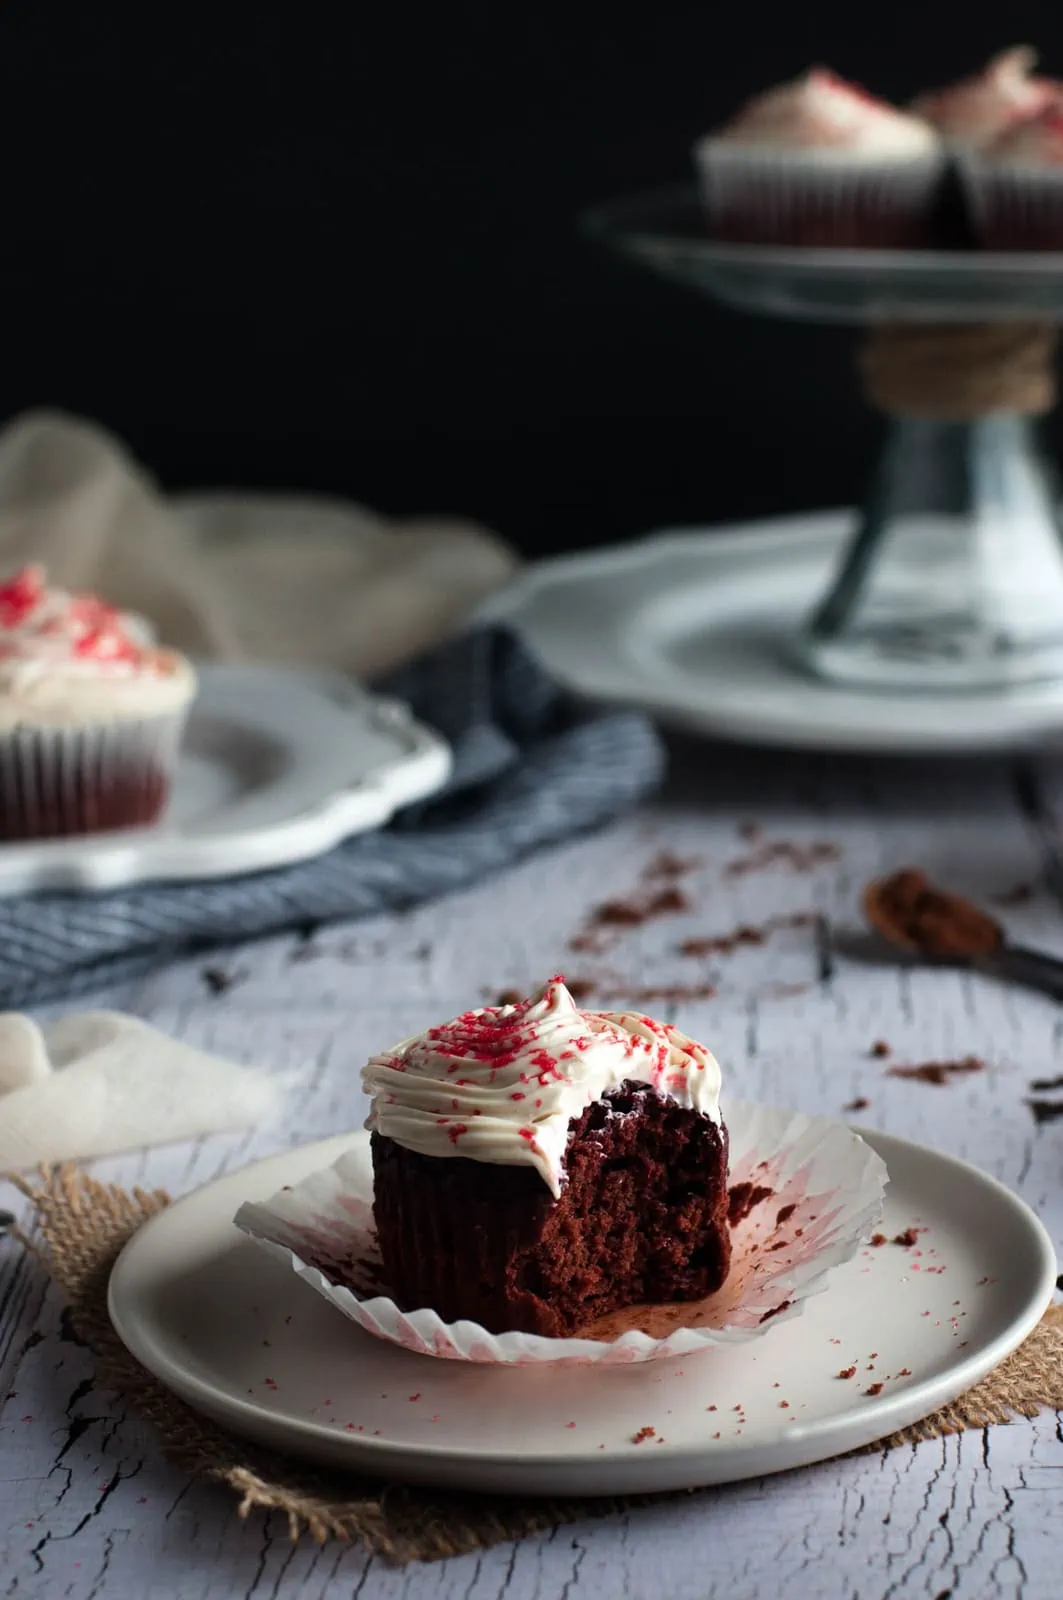 Healthy yet tasty beet red velvet cupcakes are made with whole wheat flour and no processed sugar. They're topped off with a decadent cream cheese frosting.